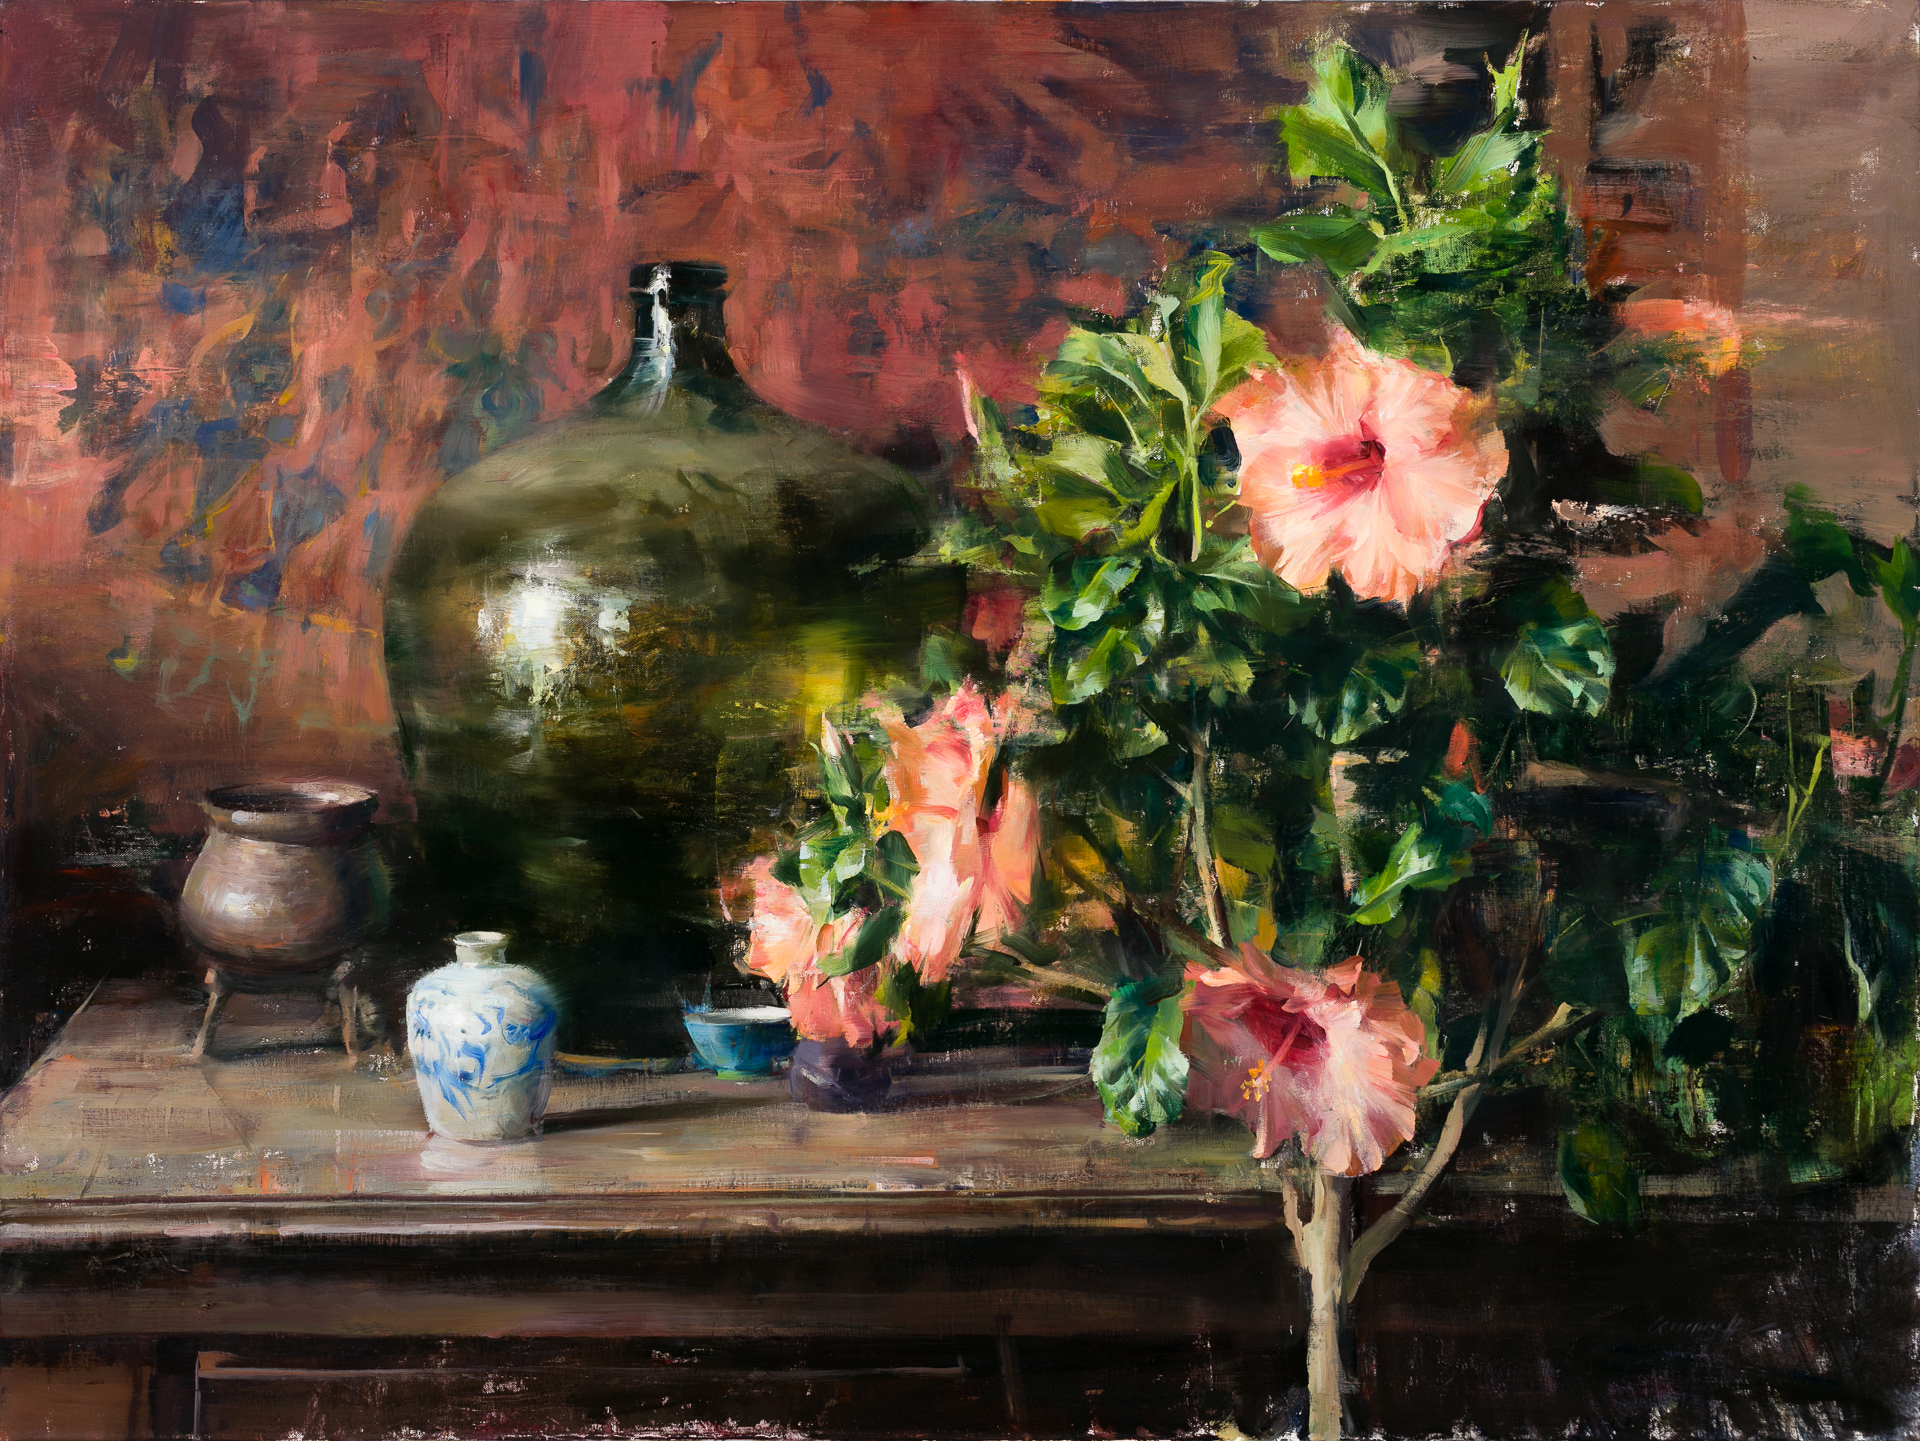 Arrangement with Hibiscus by Quang Ho